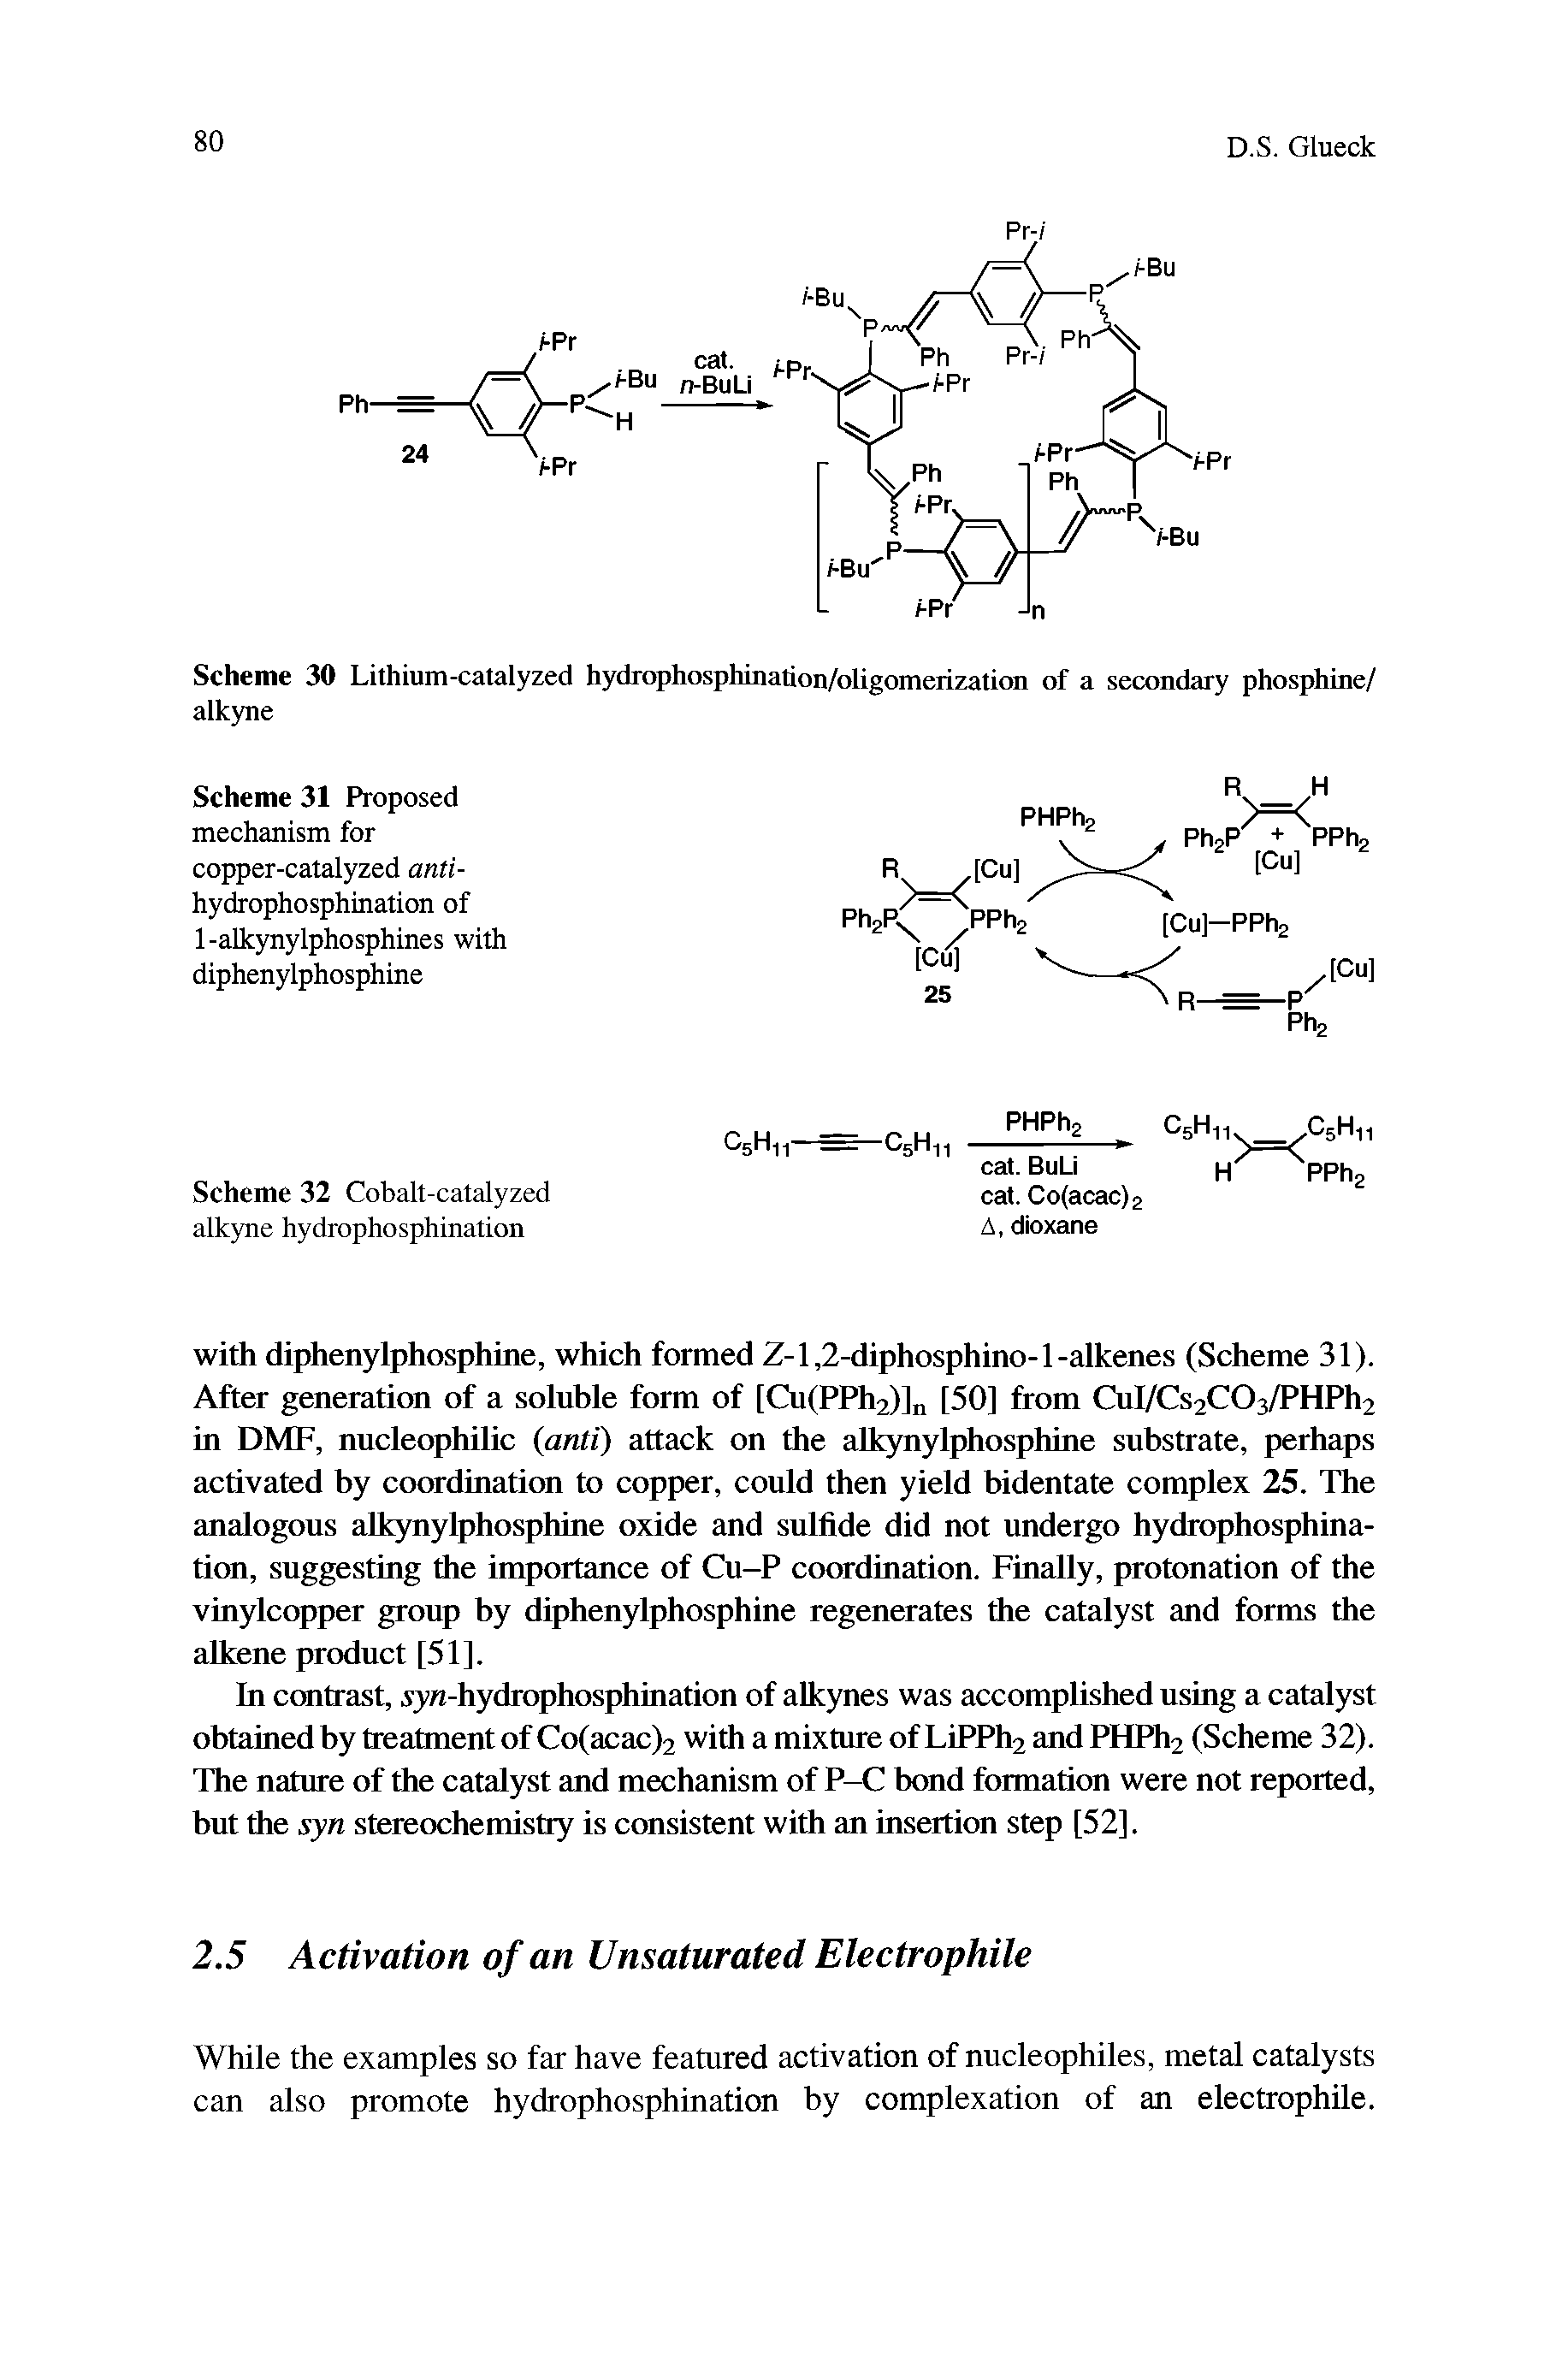 Scheme 31 Proposed mechanism for copper-catalyzed anti-hydrophosphination of 1-alkynylphosphines with diphenylphosphine...